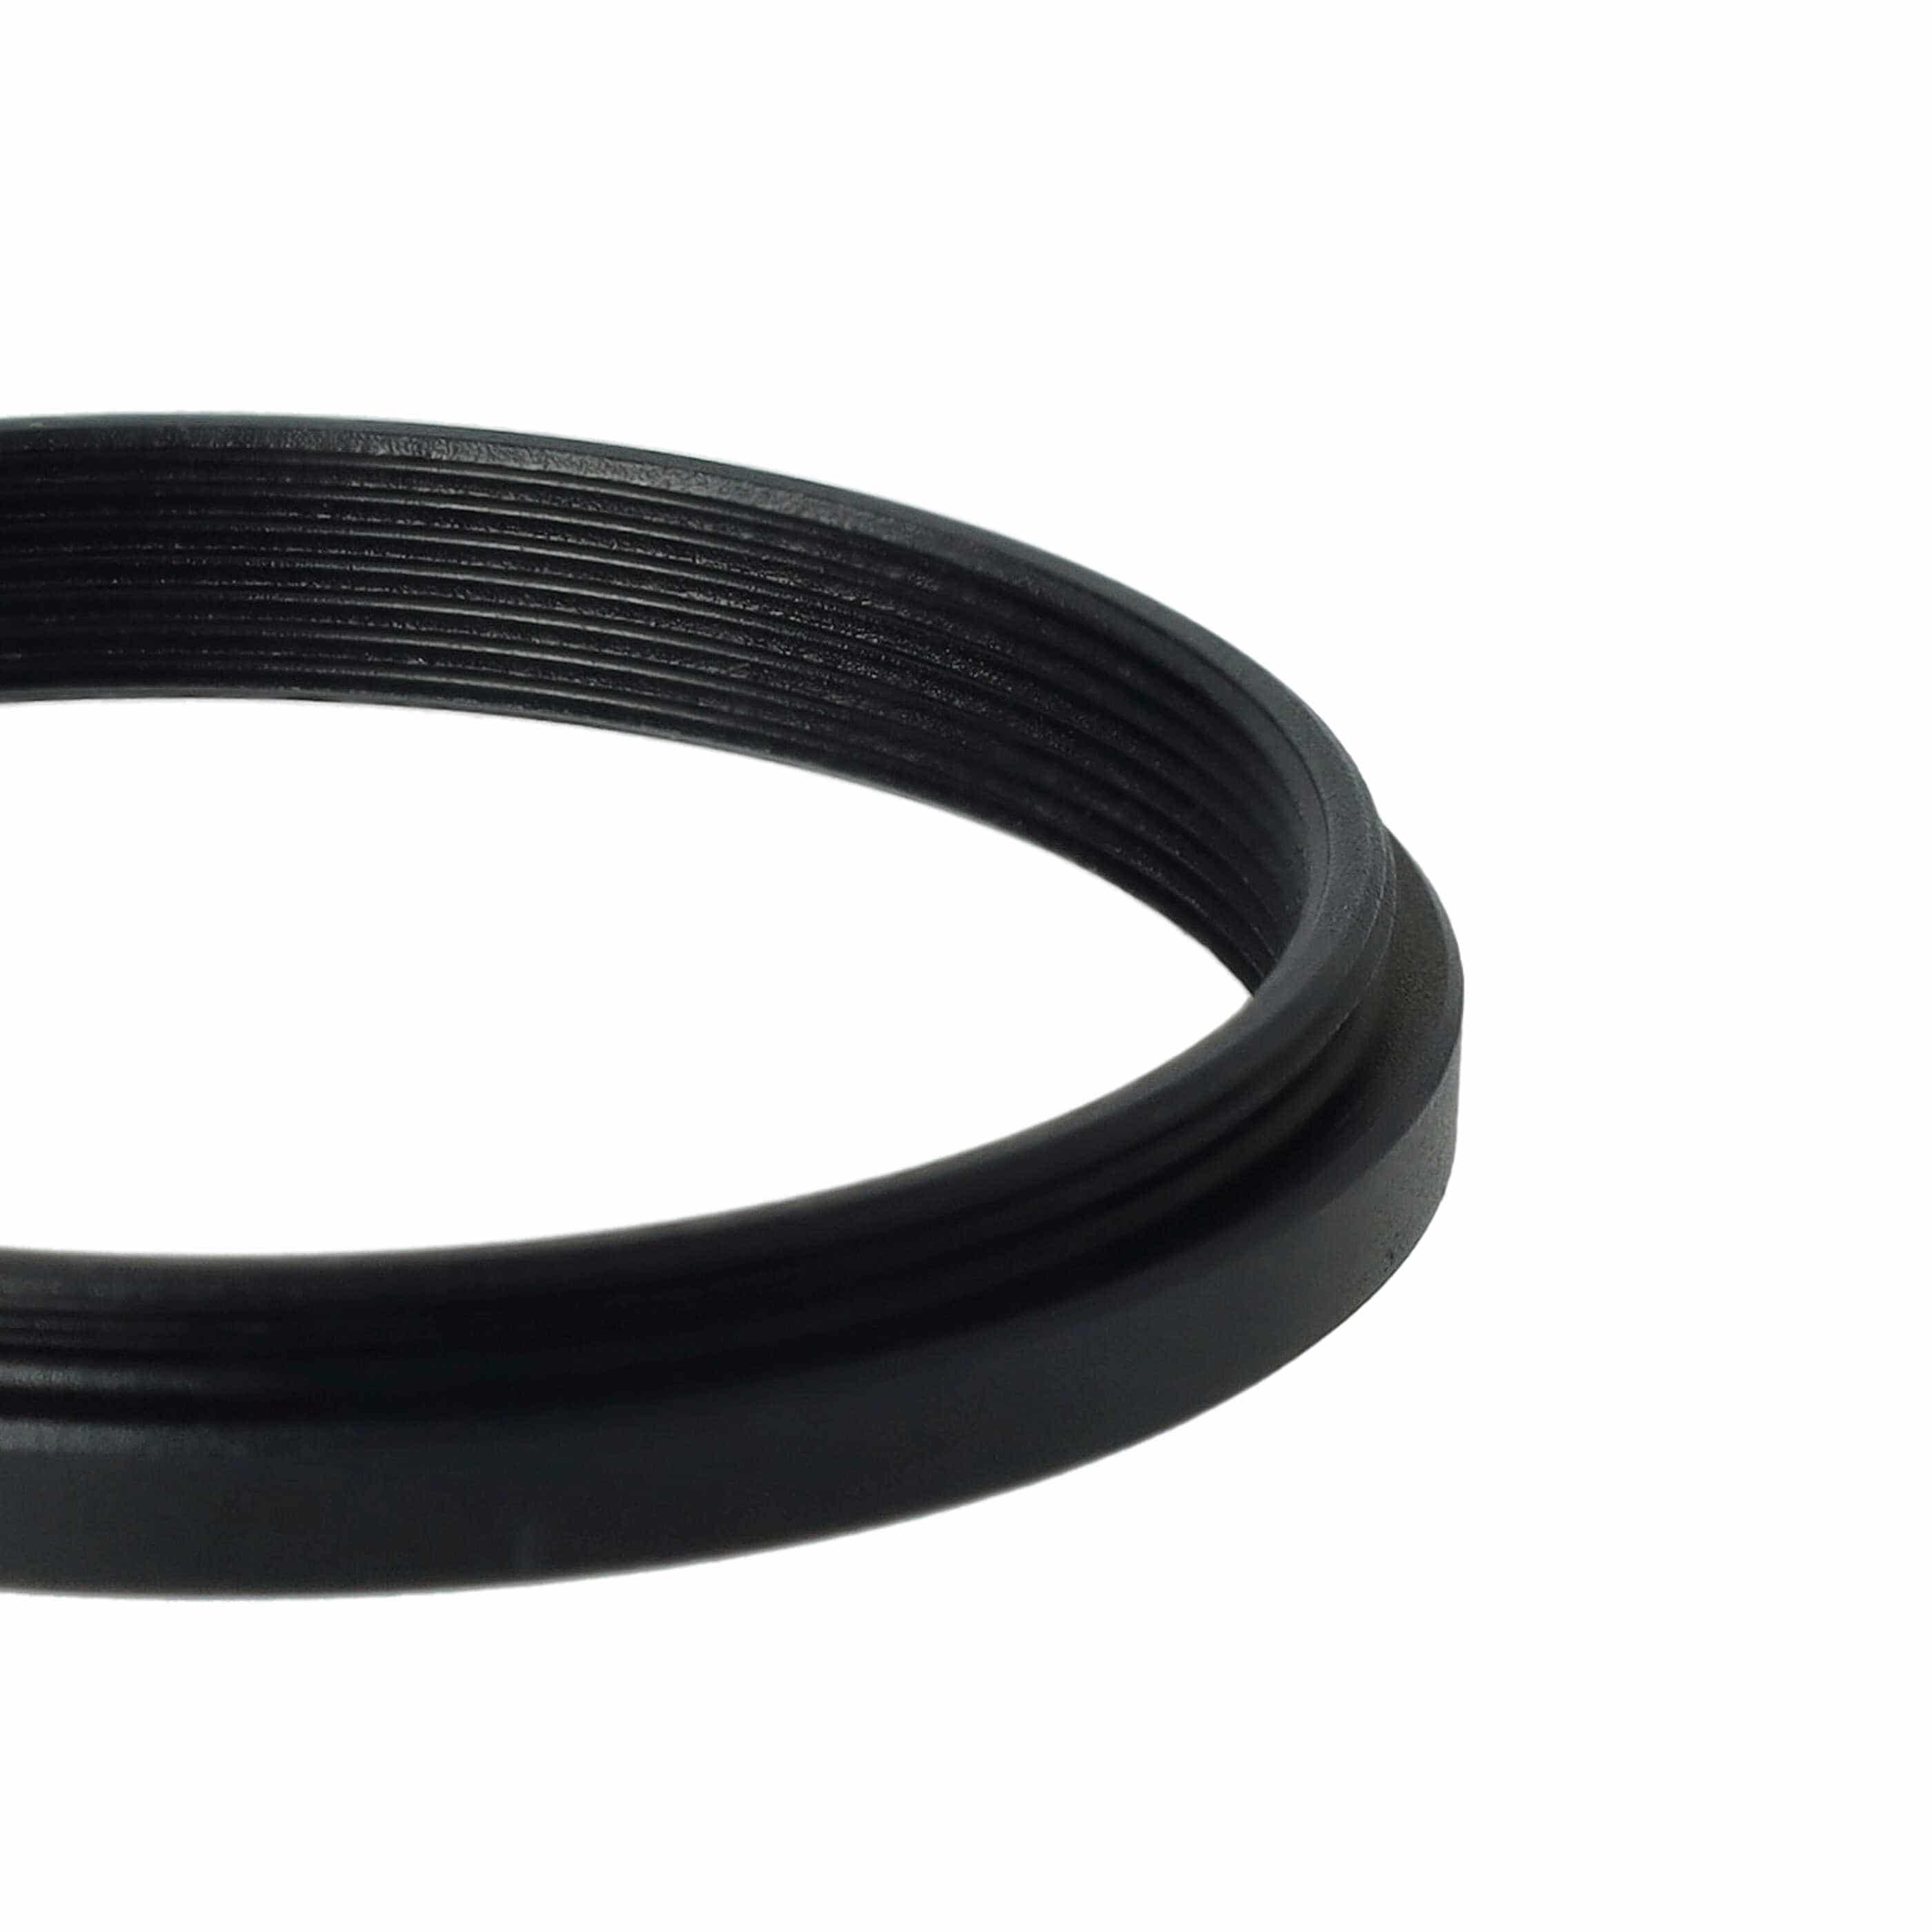 Step-Down Ring Adapter from 46 mm to 43 mm suitable for Camera Lens - Filter Adapter, metal